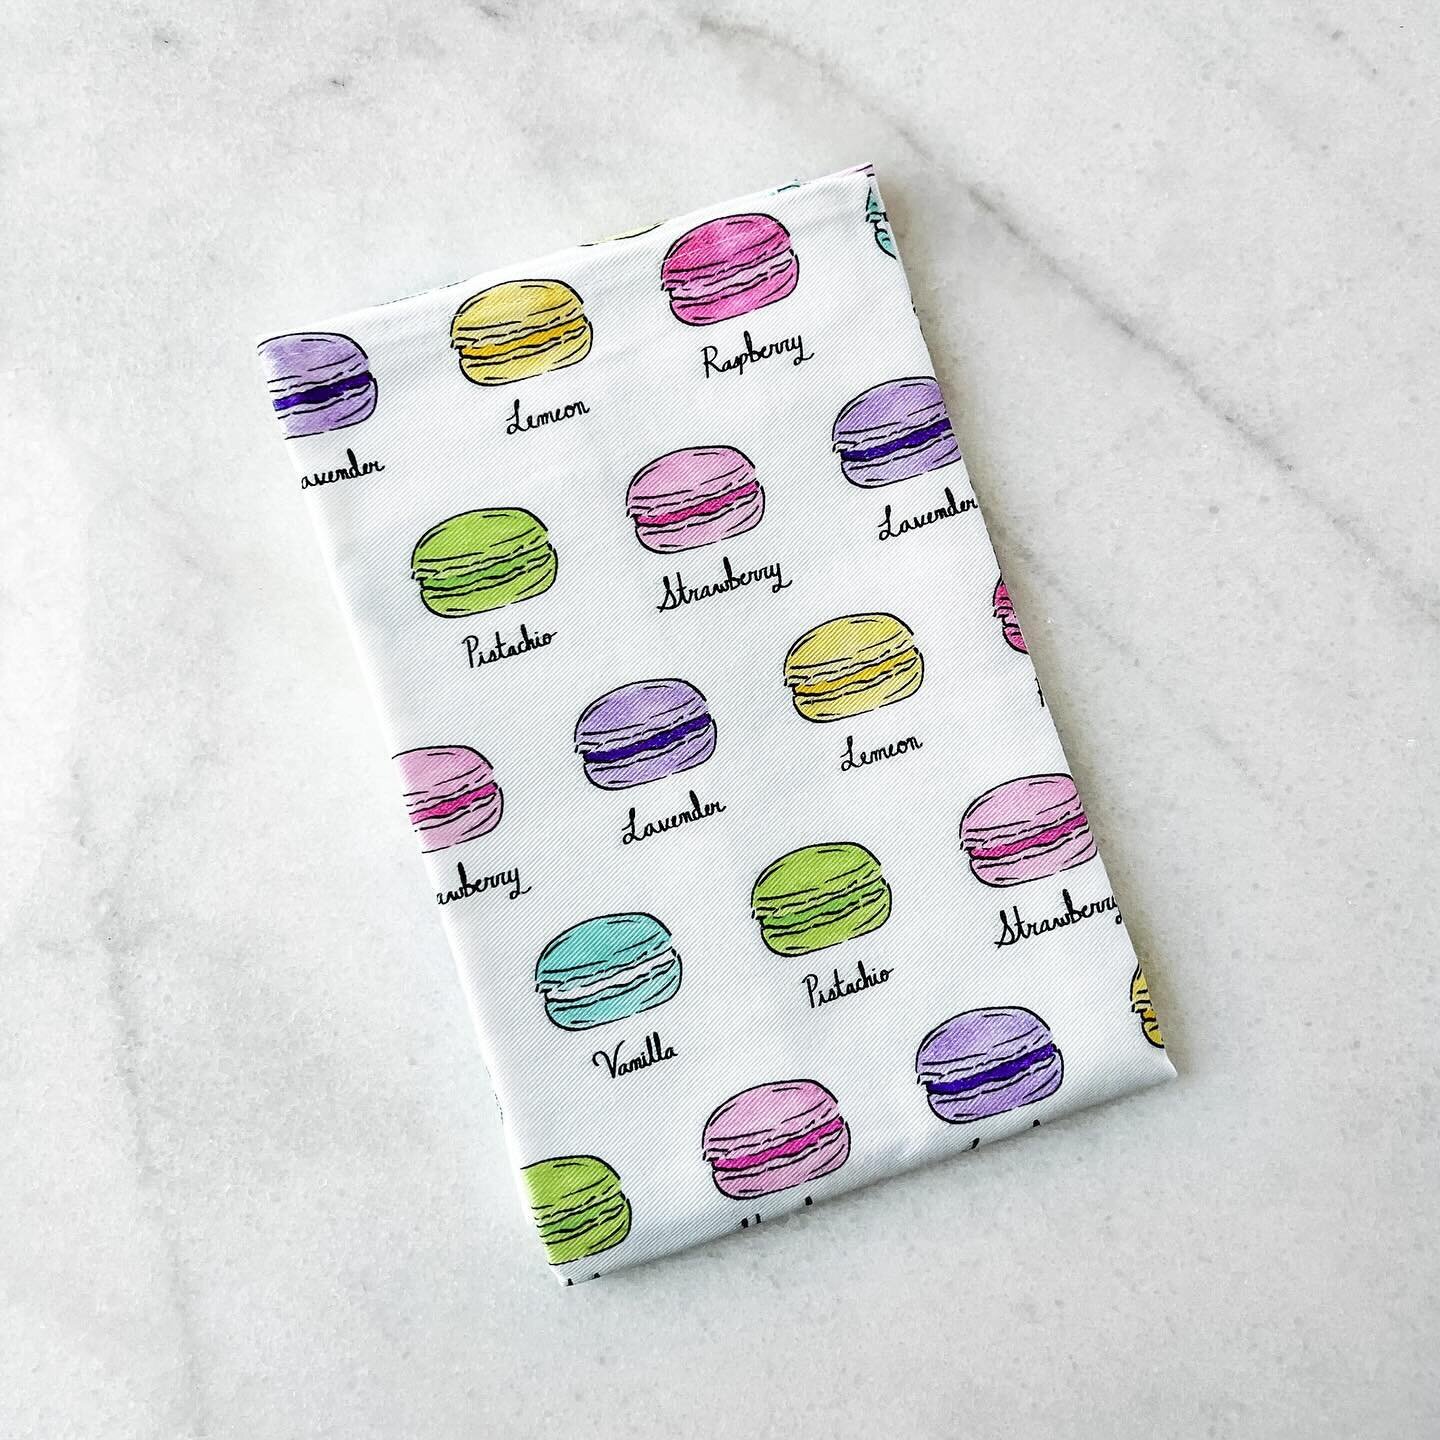 The wait is over! Our beloved macaron tea towel is back in stock ✨ Perfect for those who love a bright and colorful spring aesthetic 🌸💜 Shop at samlouise.co or visit the link in bio #macarons #teatowel #macaronlover #springaesthetic #samlouiseco